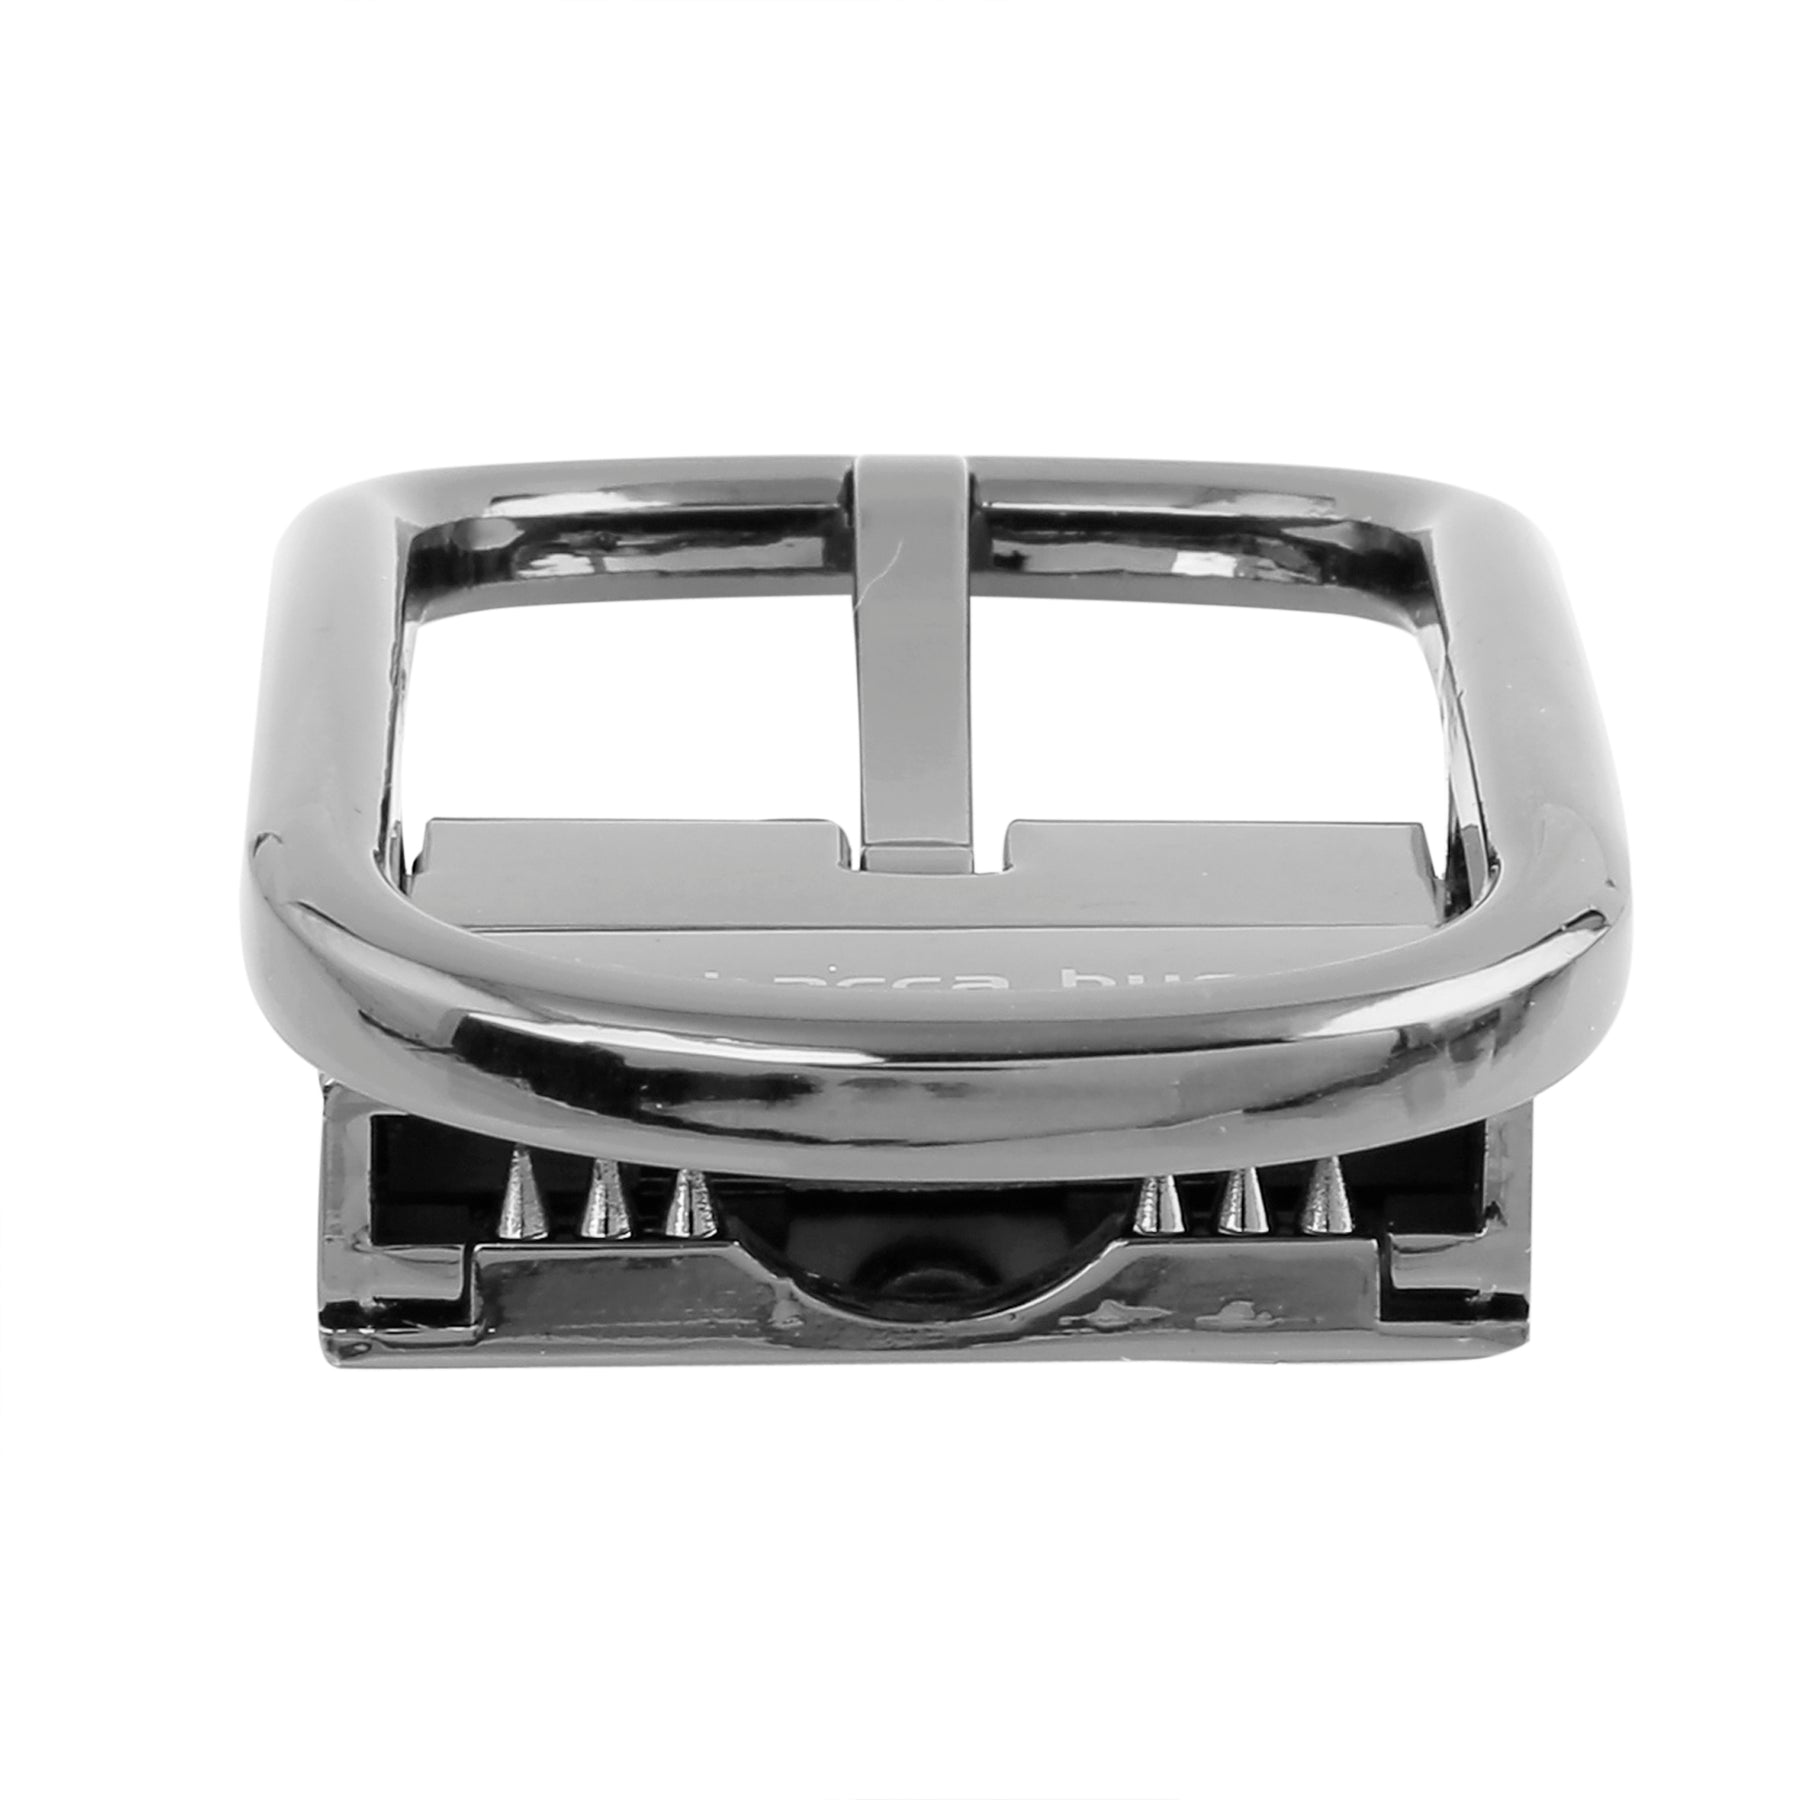 Bacca Bucci 35MM Nickle-Free Reversible Clamp Belt Buckle with Branding (Buckle only)